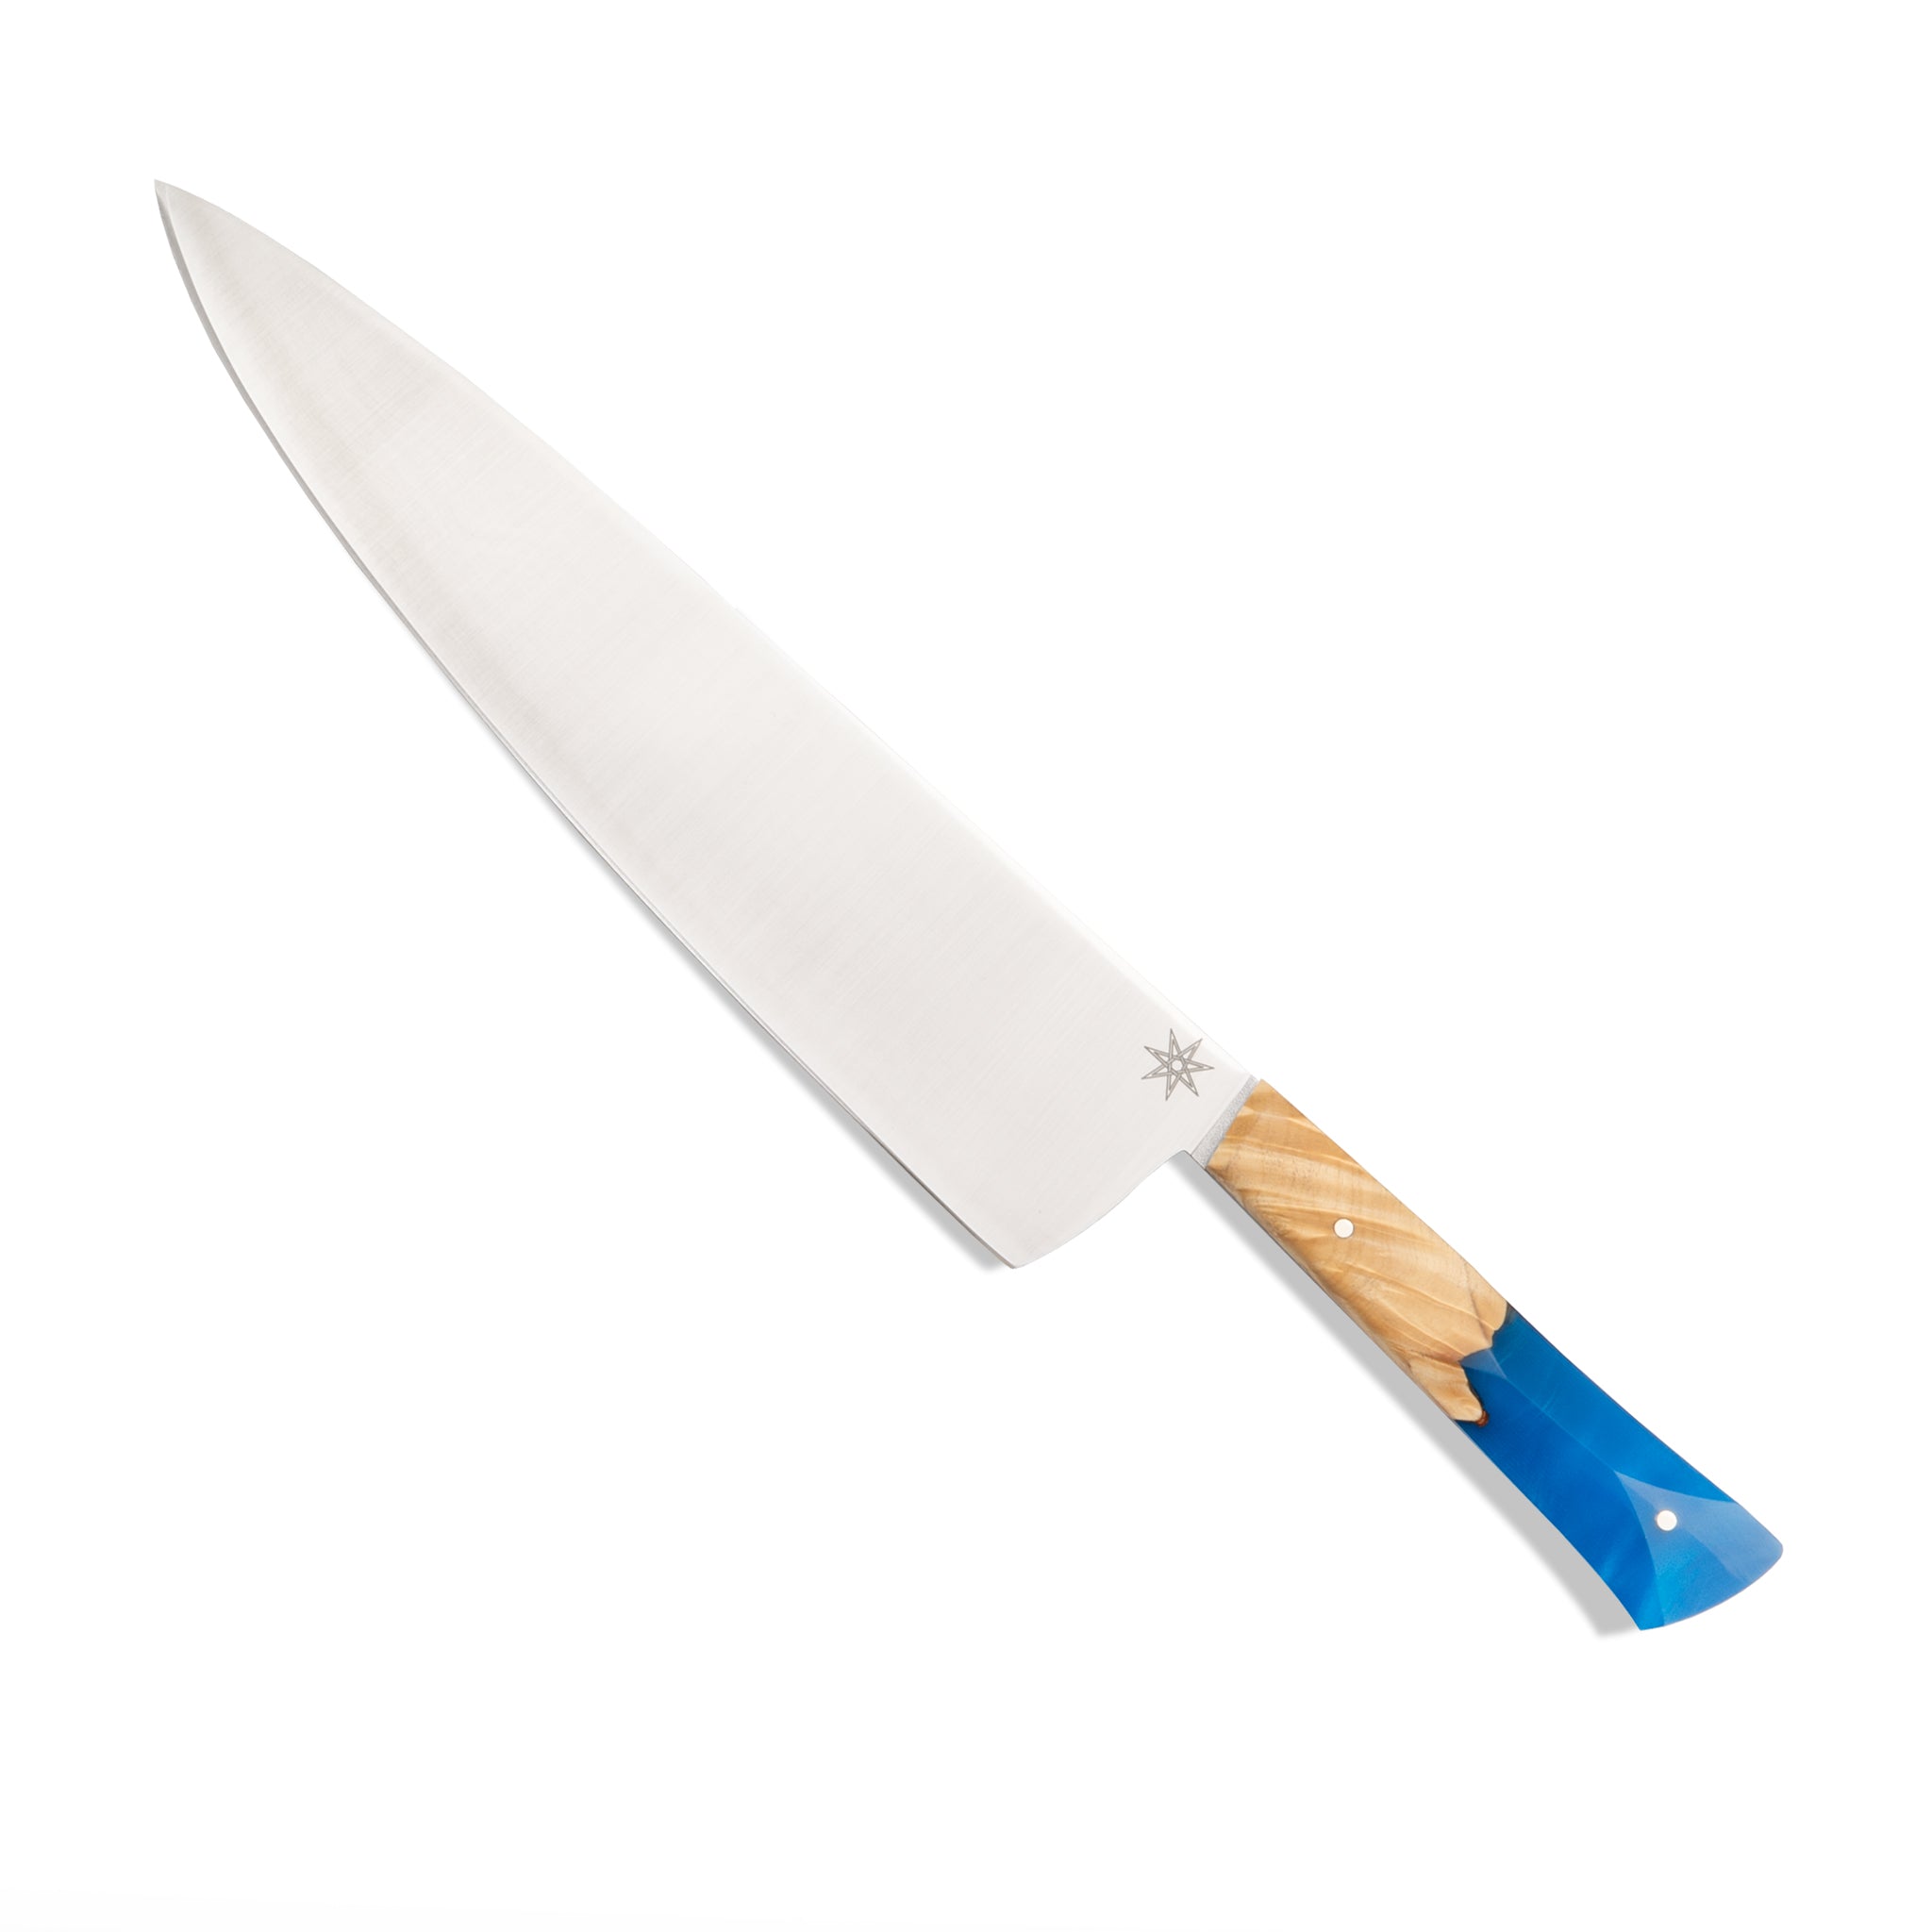 Town Cutler Tahoe Bliss 10" Chef Knife.